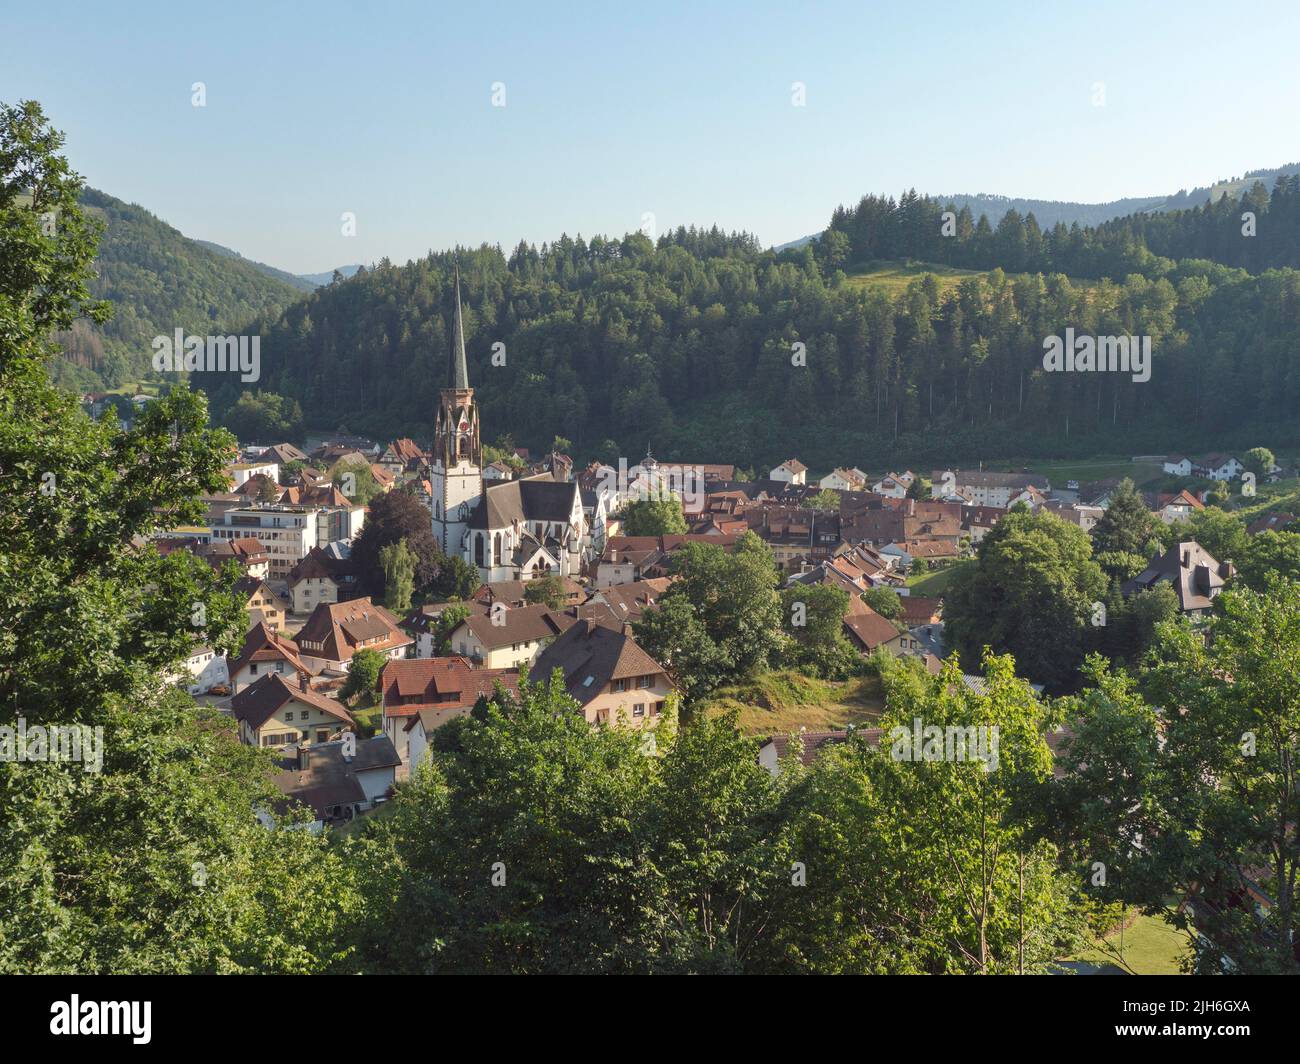 View from the Schlageter Monument of the village of Schoenau in the Upper Wiesetal in the Black Forest, Schlageter Monument Ruin, Schoenau Stock Photo